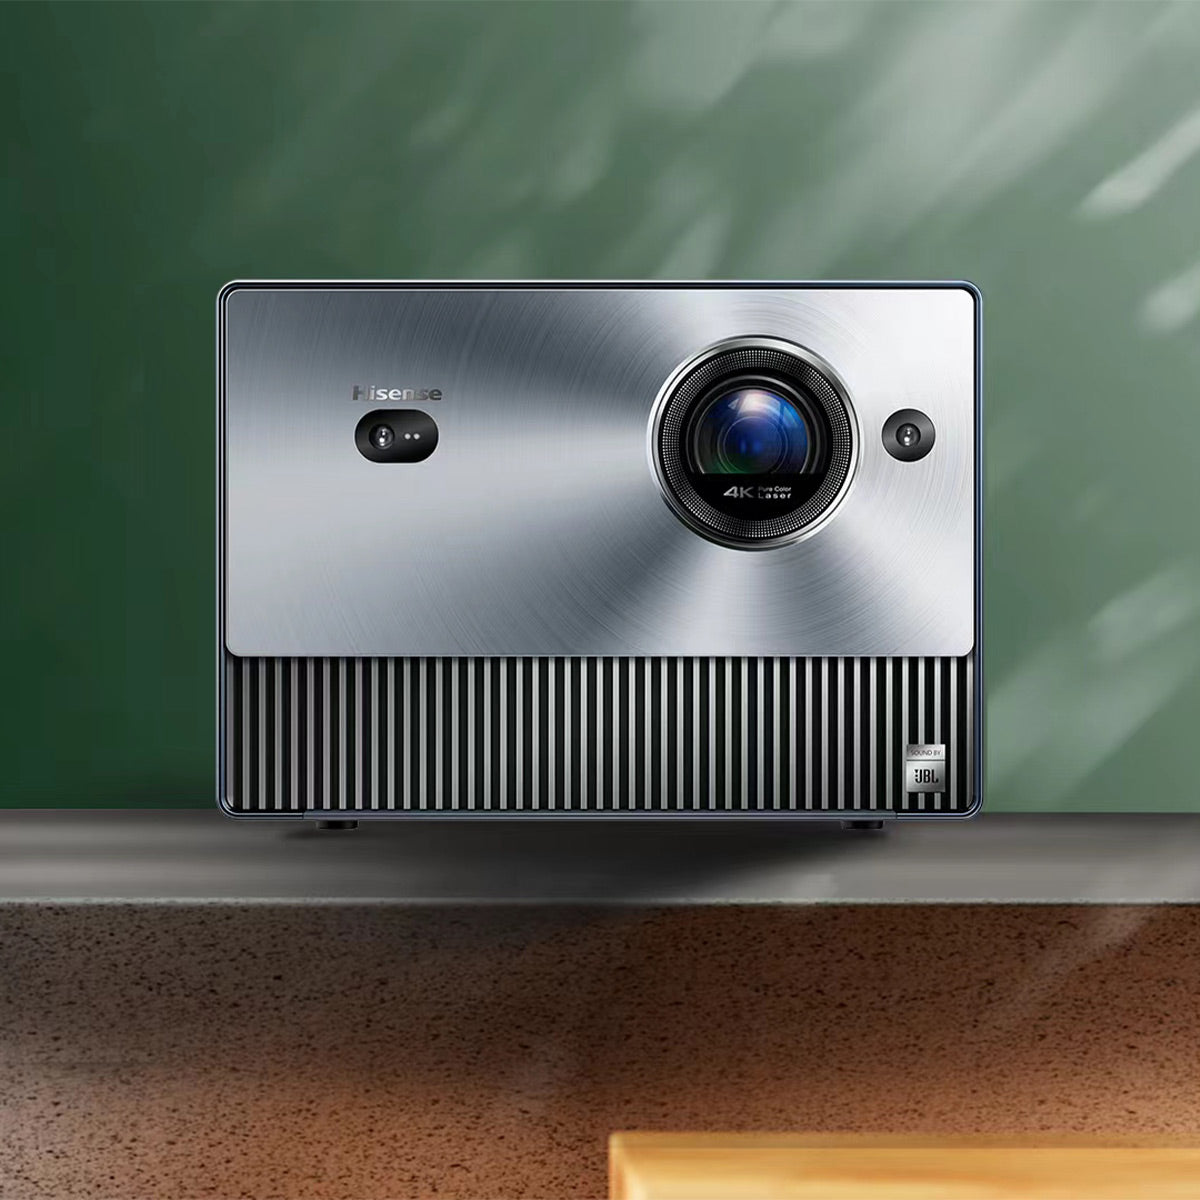 Hisense C1: a small 4K Dolby Vision projector that's sure to